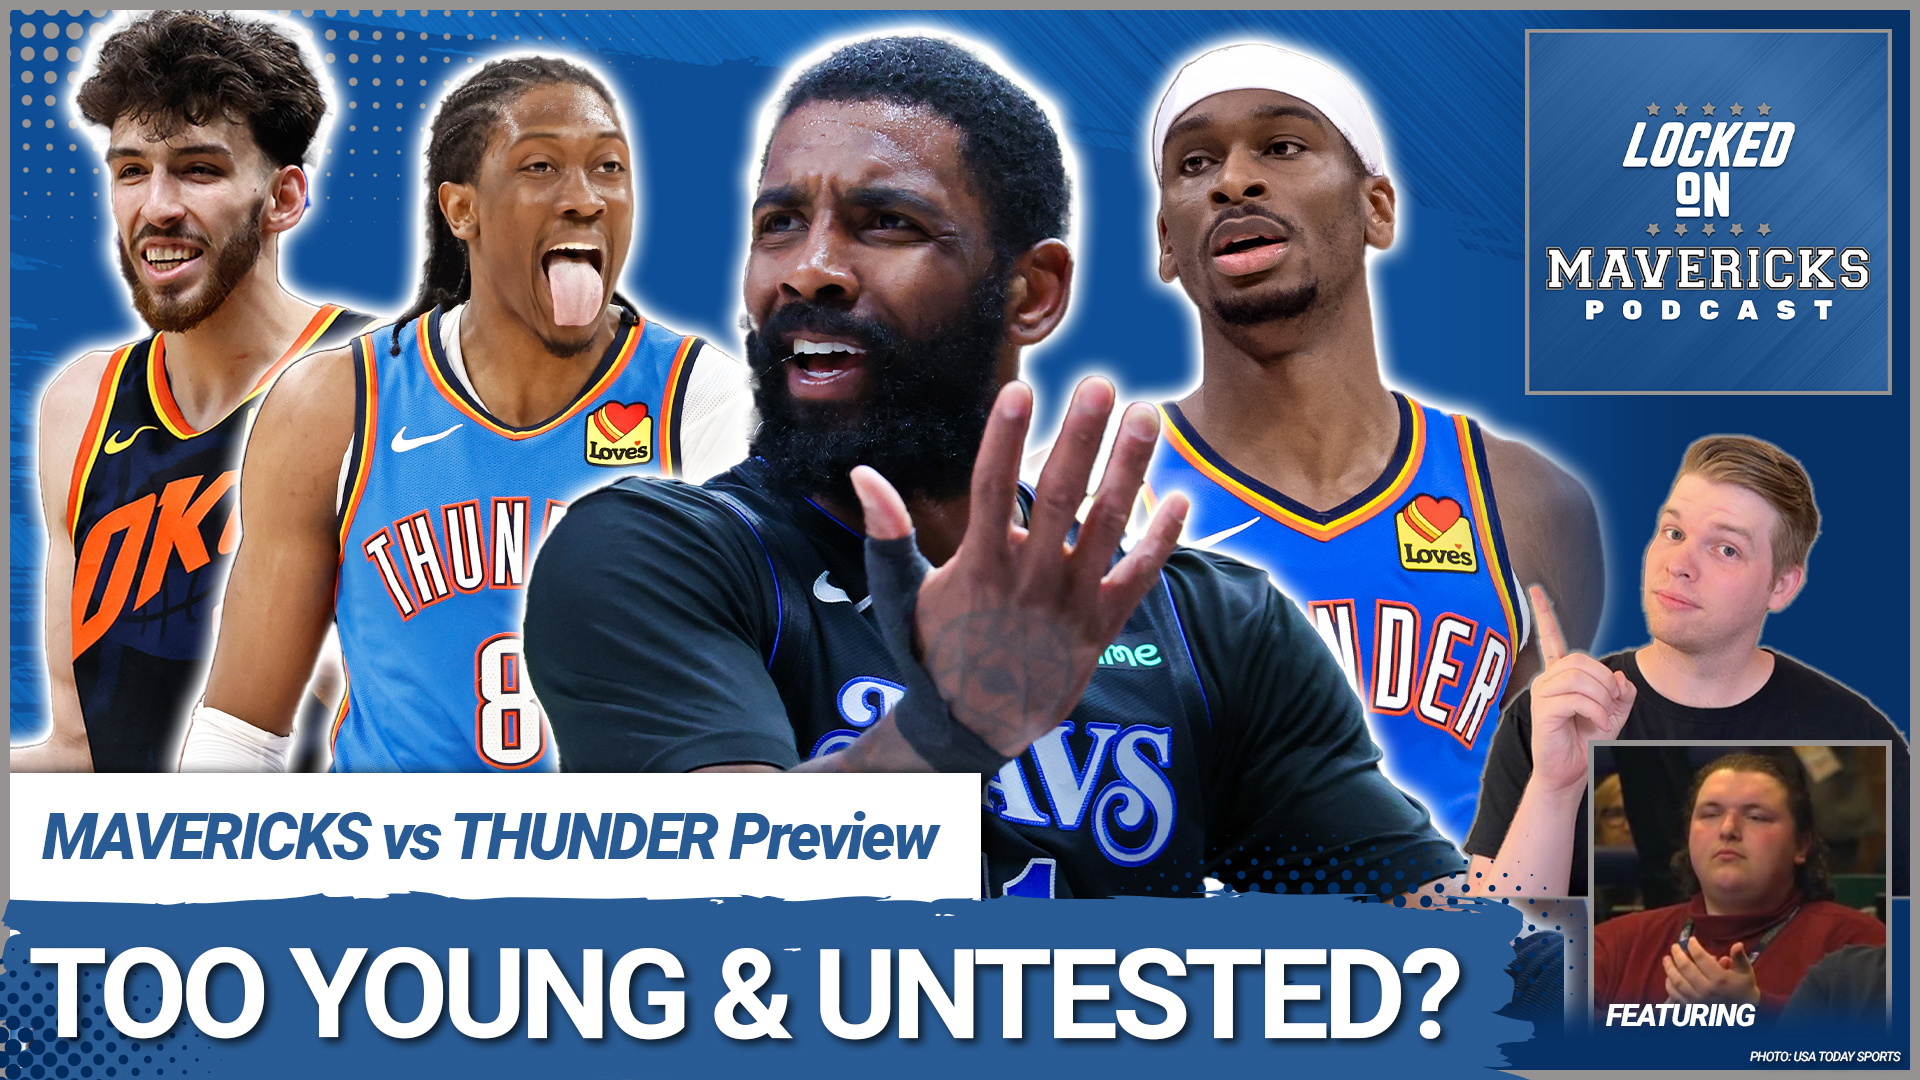 Nick Angstadt is joined by Rylan Stiles to discuss the Mavs vs Thunder series, why Shai Gilgeous-Alexander and OKC aren't too untested for this level.